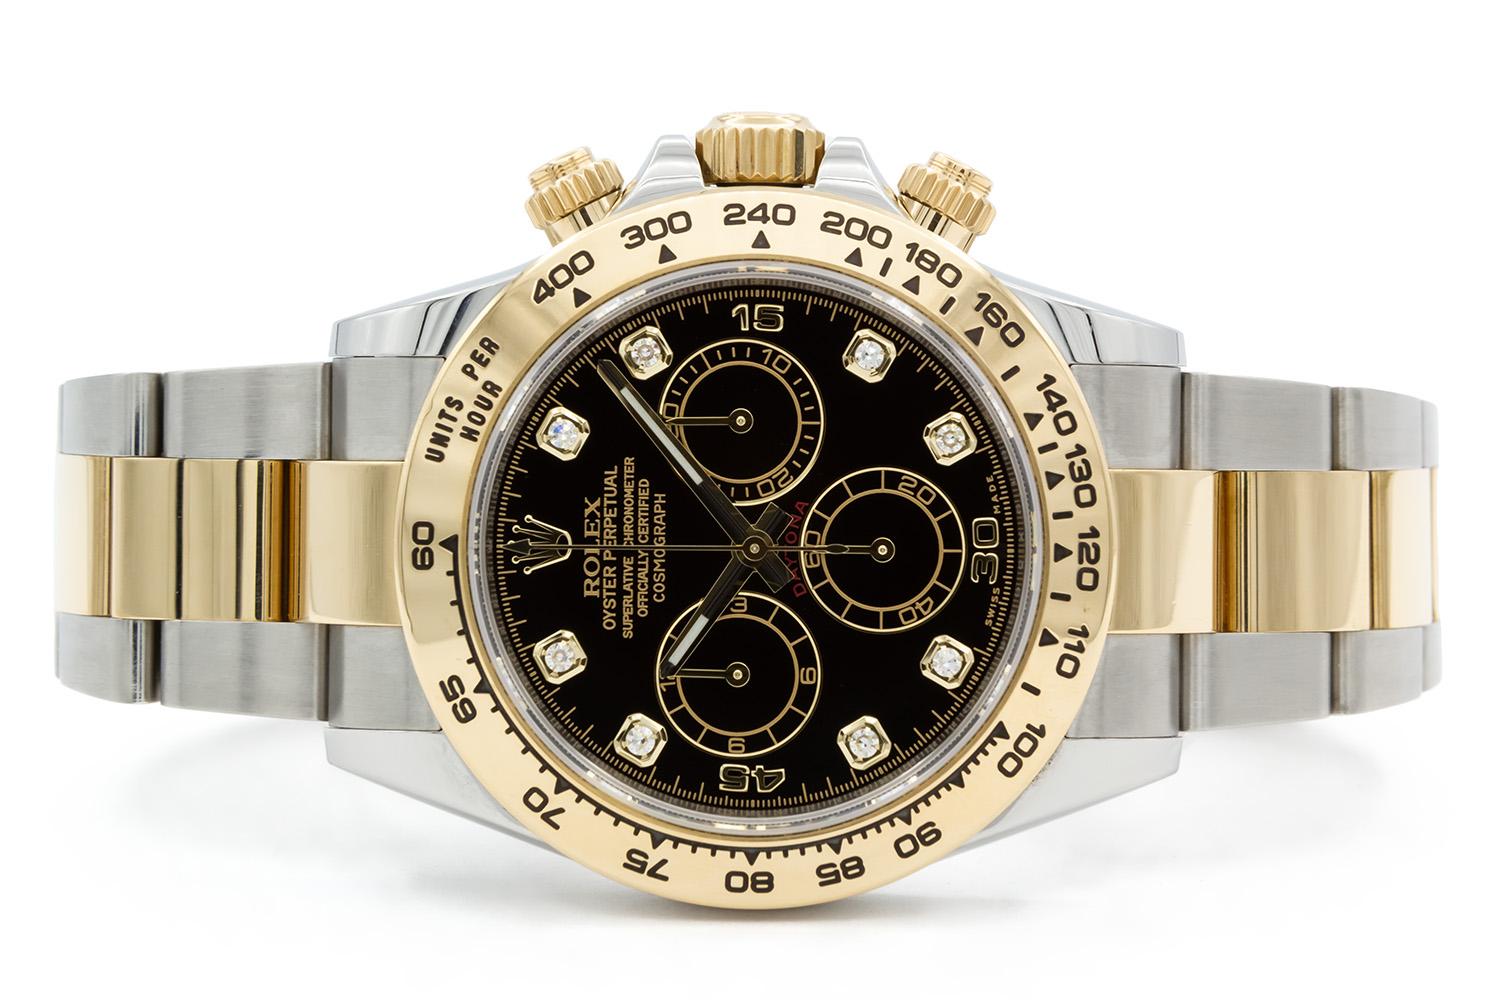 We are pleased to offer this 2020 Rolex Daytona Cosmograph 116503. This beautiful two tone watch features a 40mm stainless steel case with black diamond dial, engraved inner bezel, stainless steel and 18k yellow gold bracelet with polished center